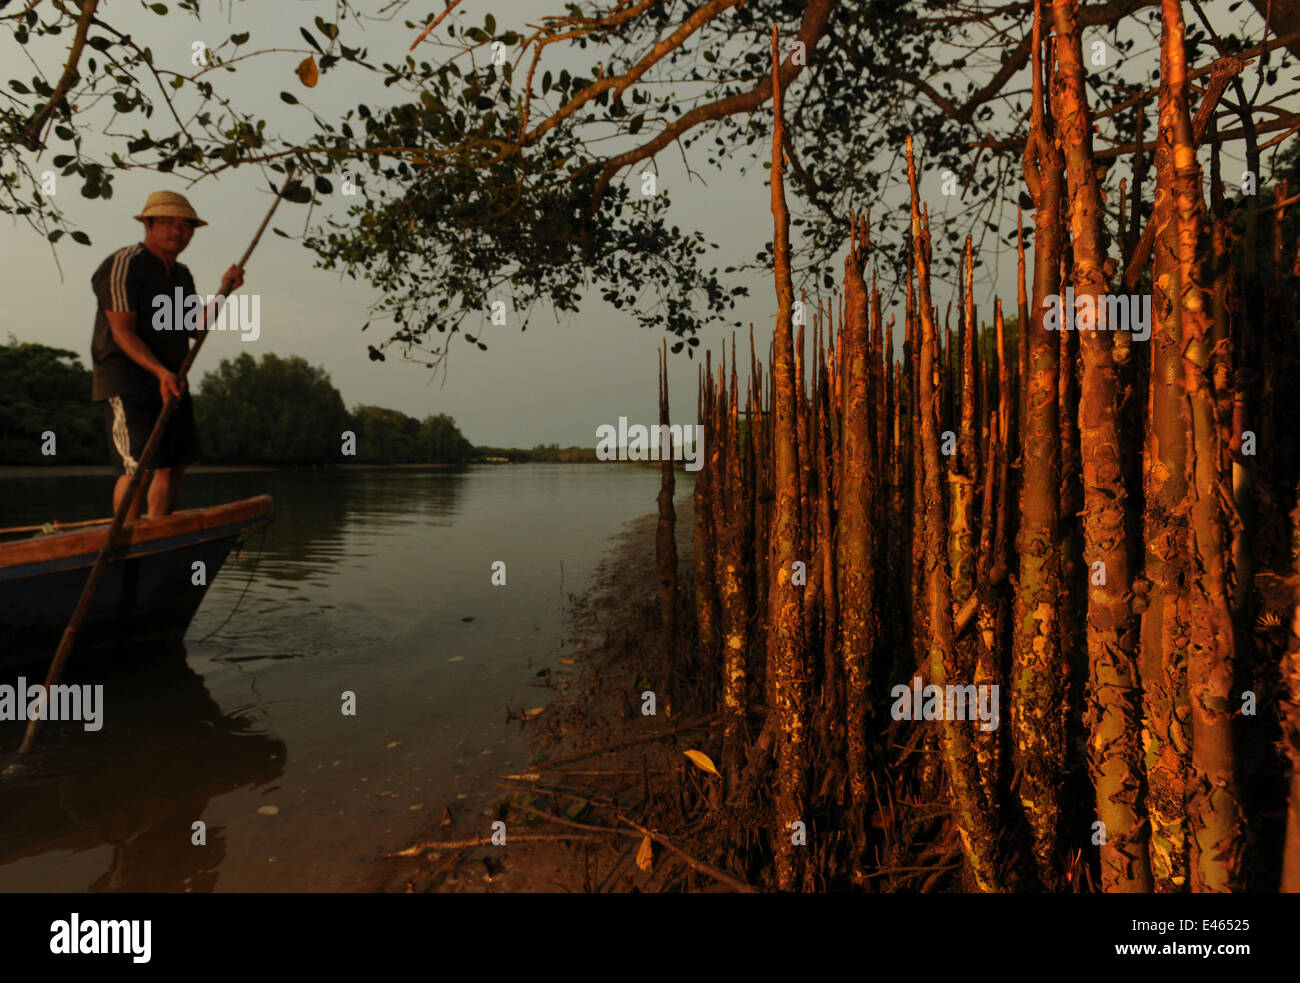 Mangrove forest (Sonneratia hainanensis) respiratory roots with man standing up in small boat, Guangxi Province, China. Stock Photo